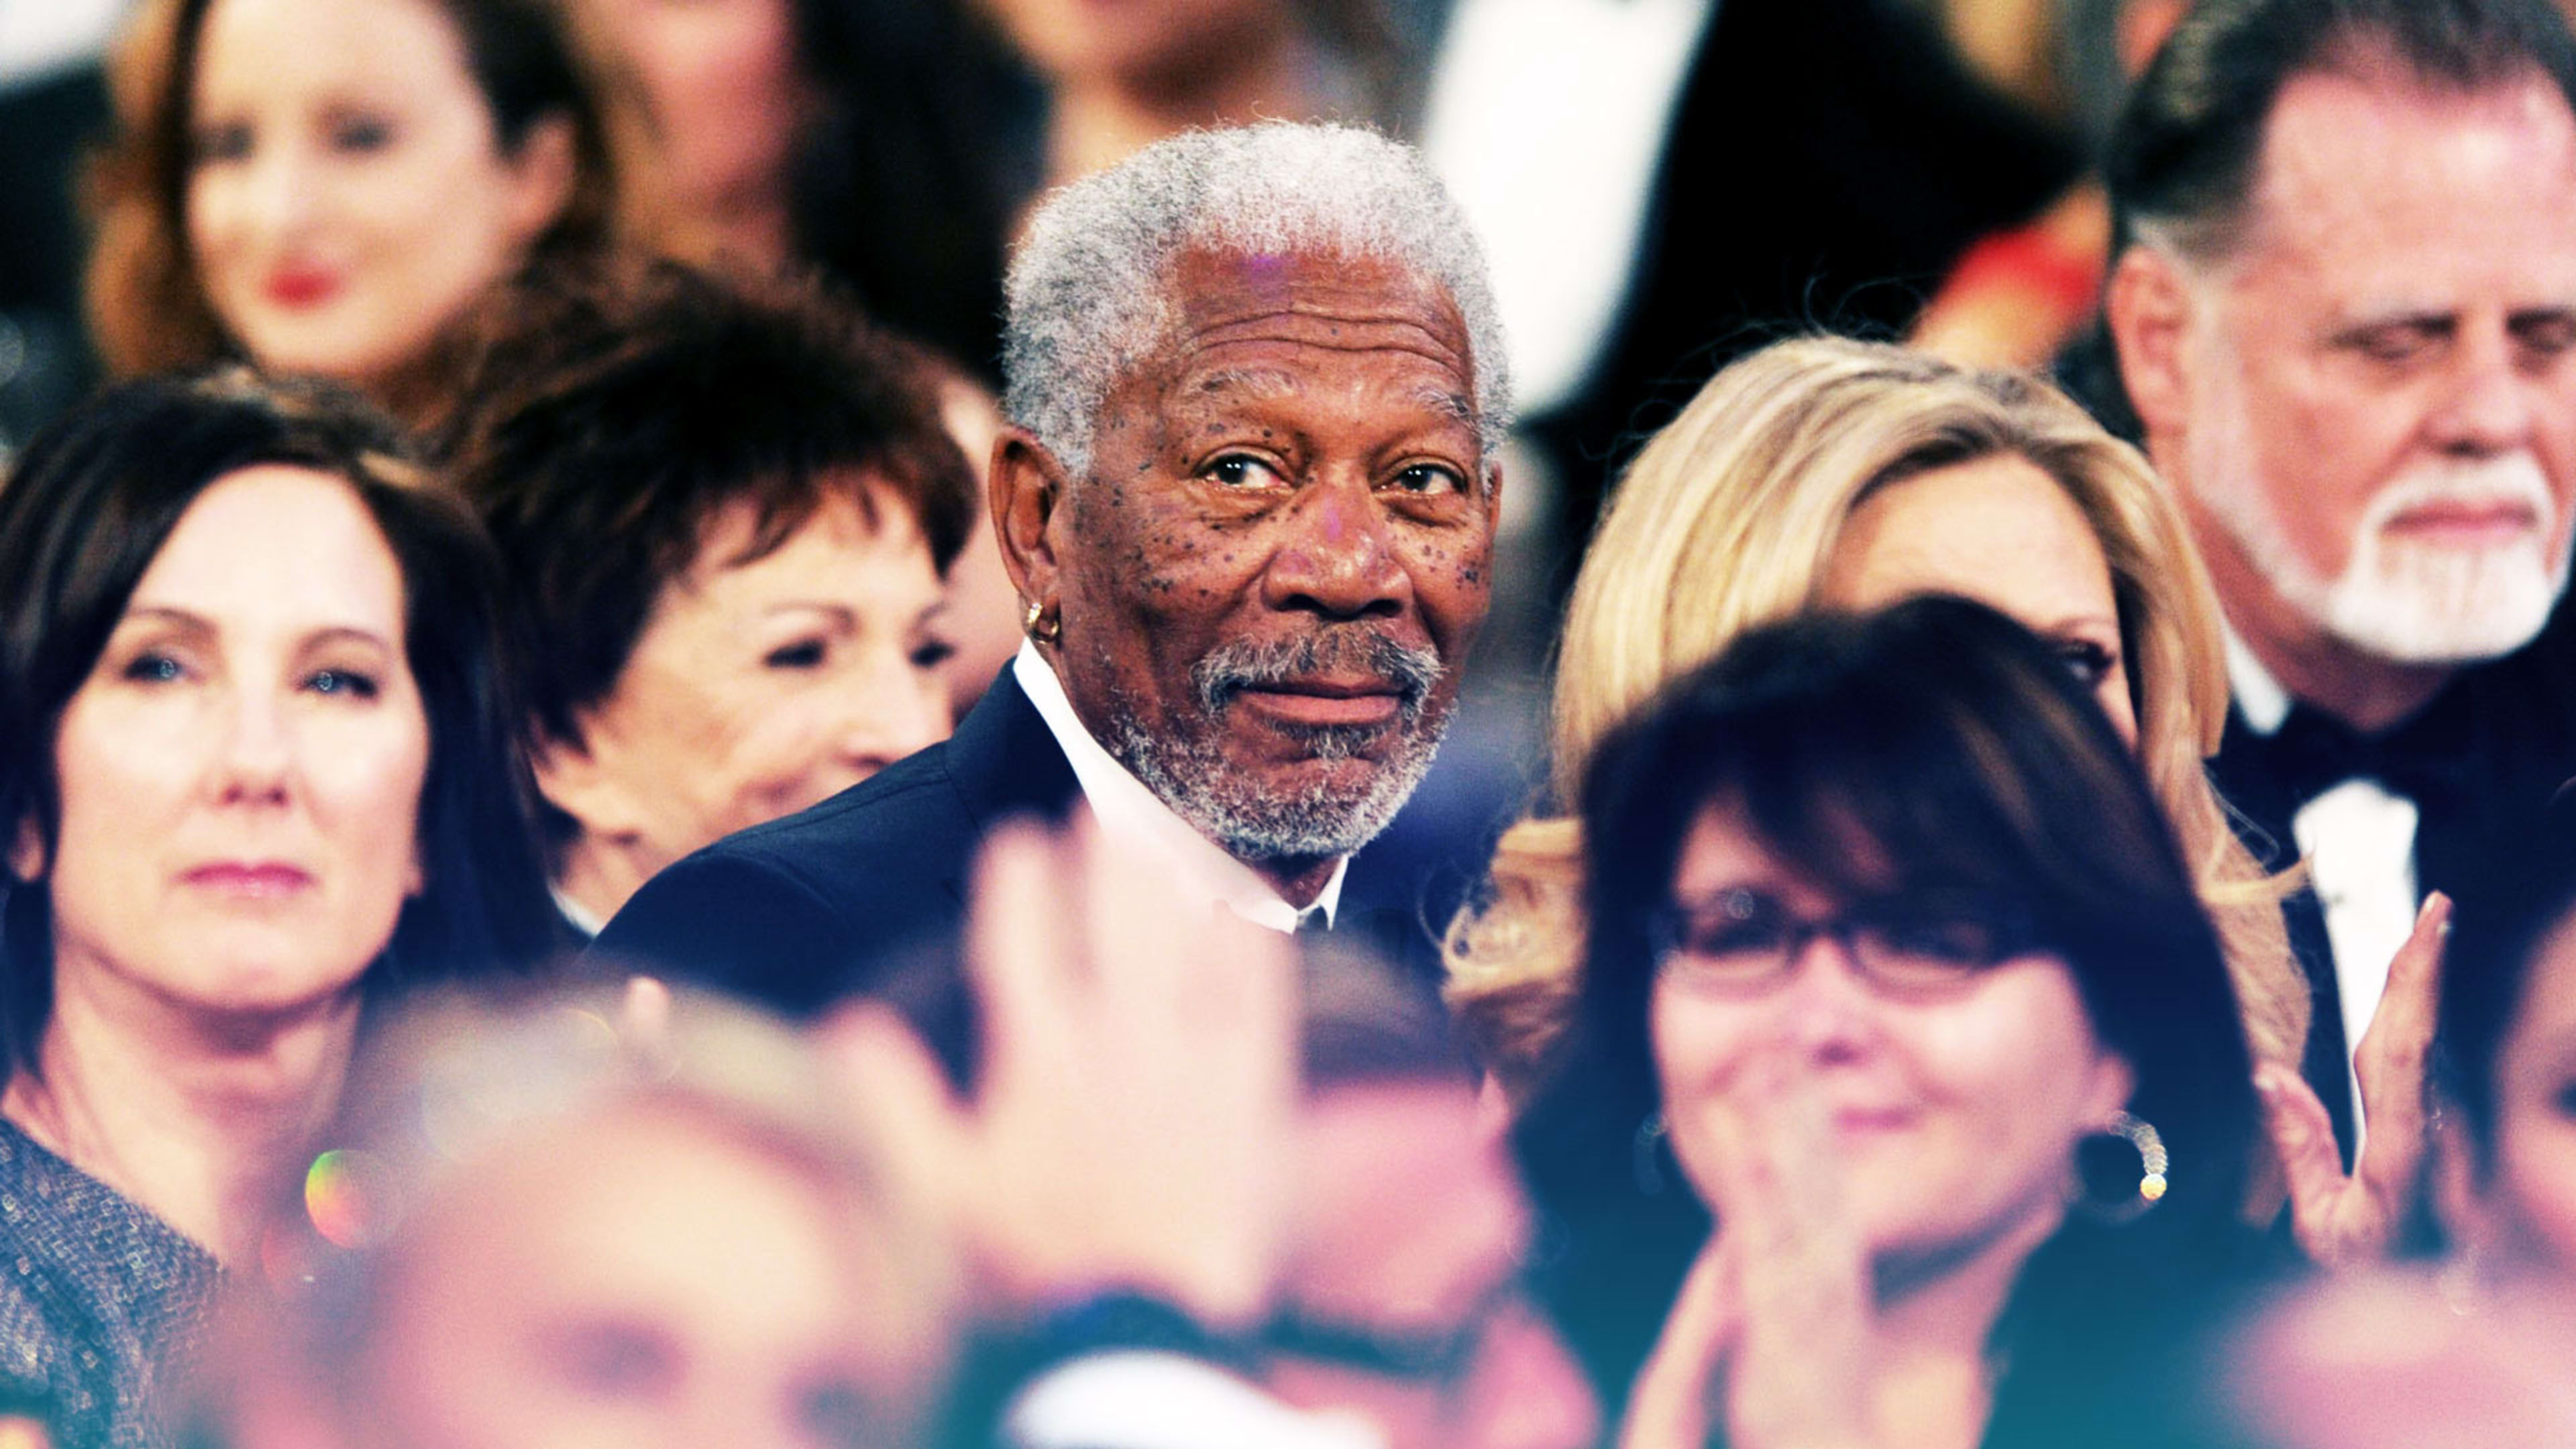 Morgan Freeman Will Be The Voice Of Jarvis, Mark Zuckerberg’s Home AI Assistant